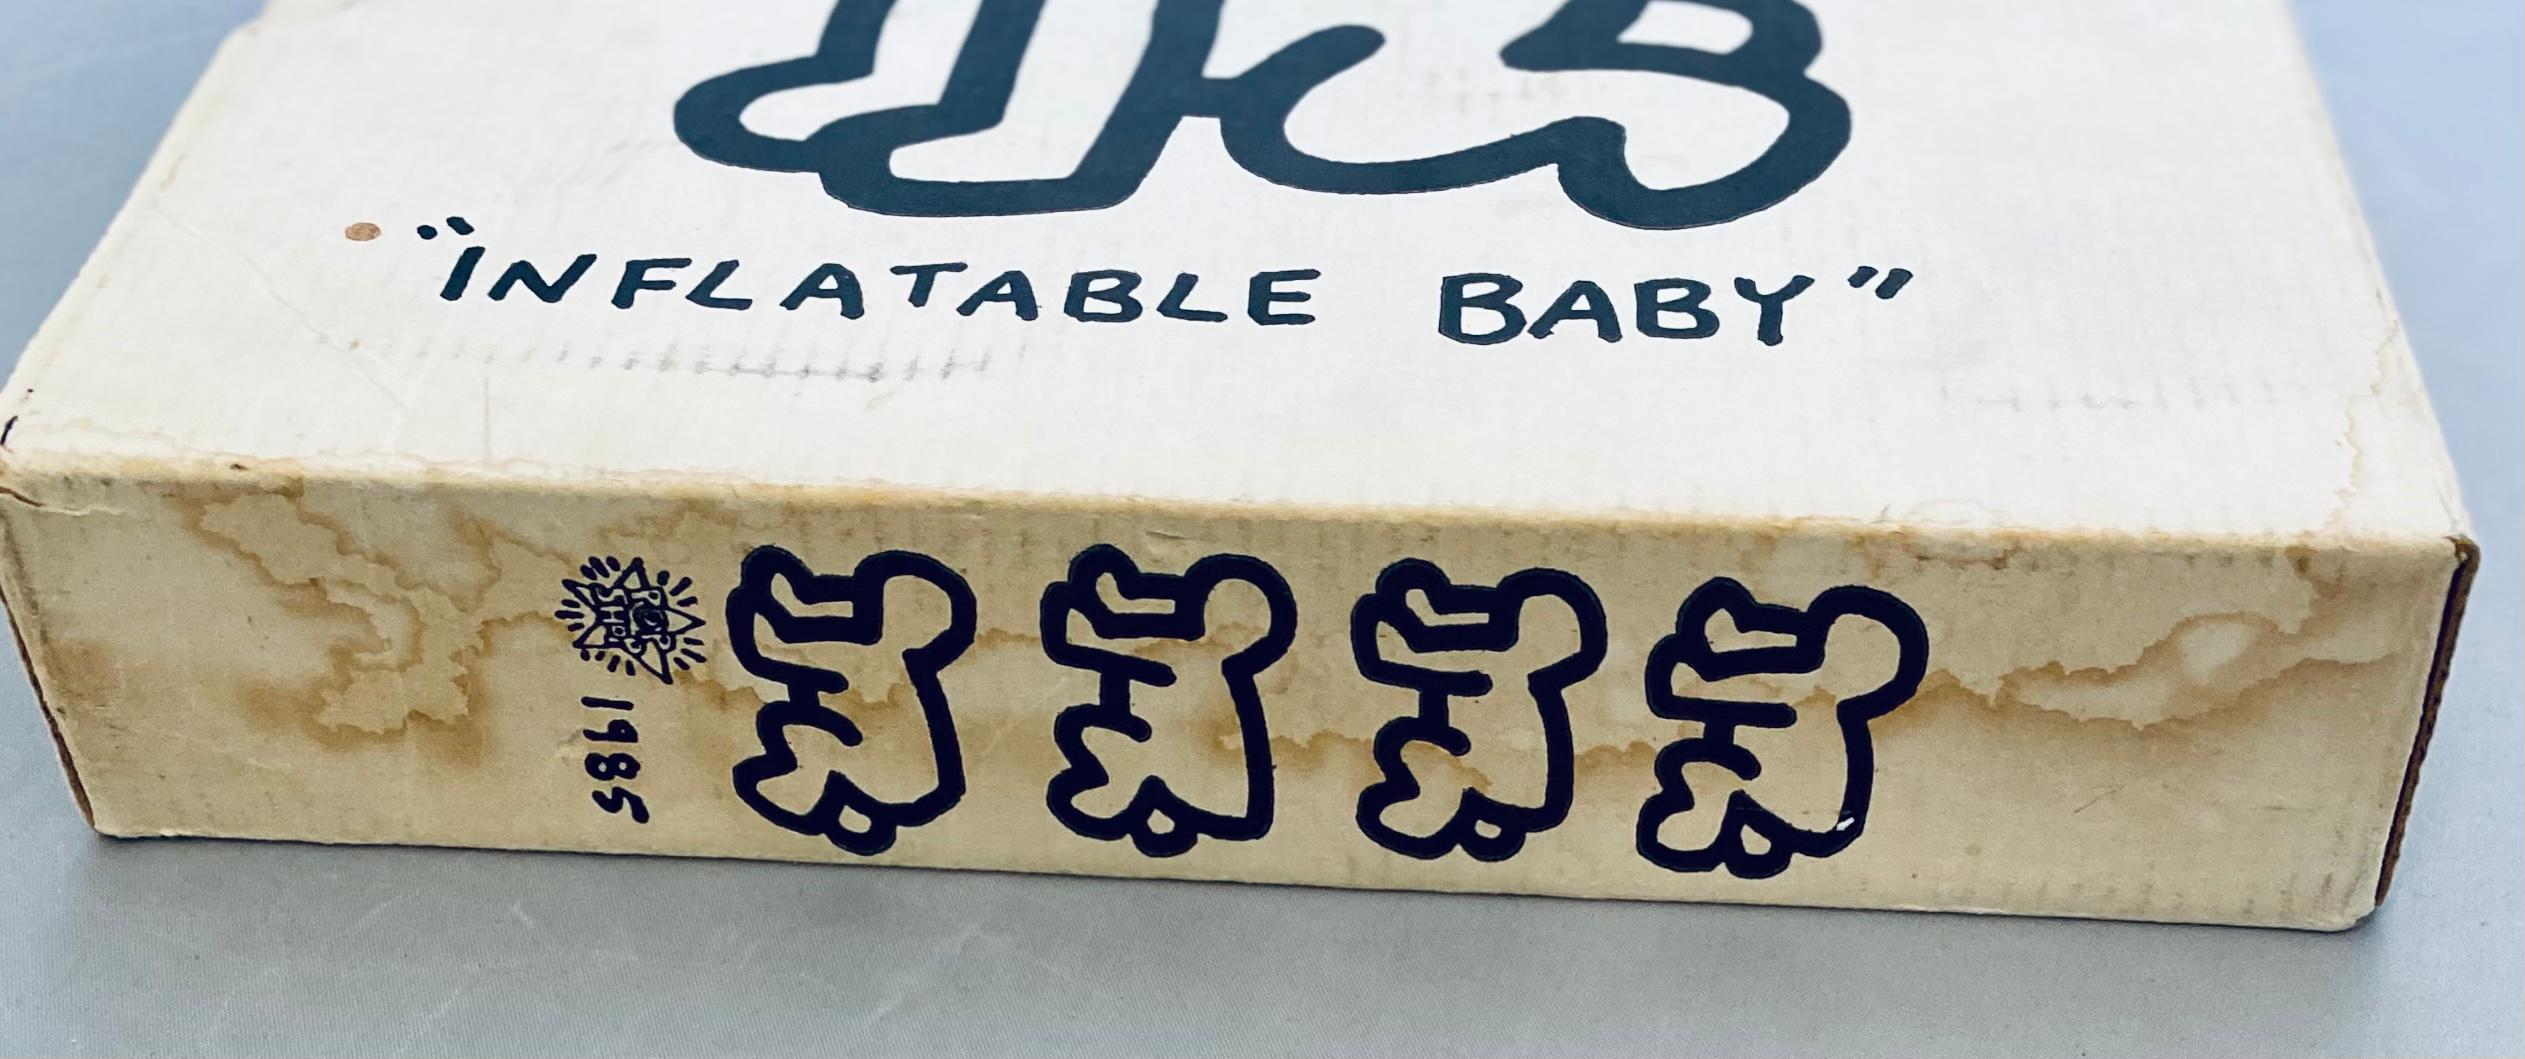 Keith Haring Inflatable Baby box (Keith Haring Pop Shop 1980s) 4